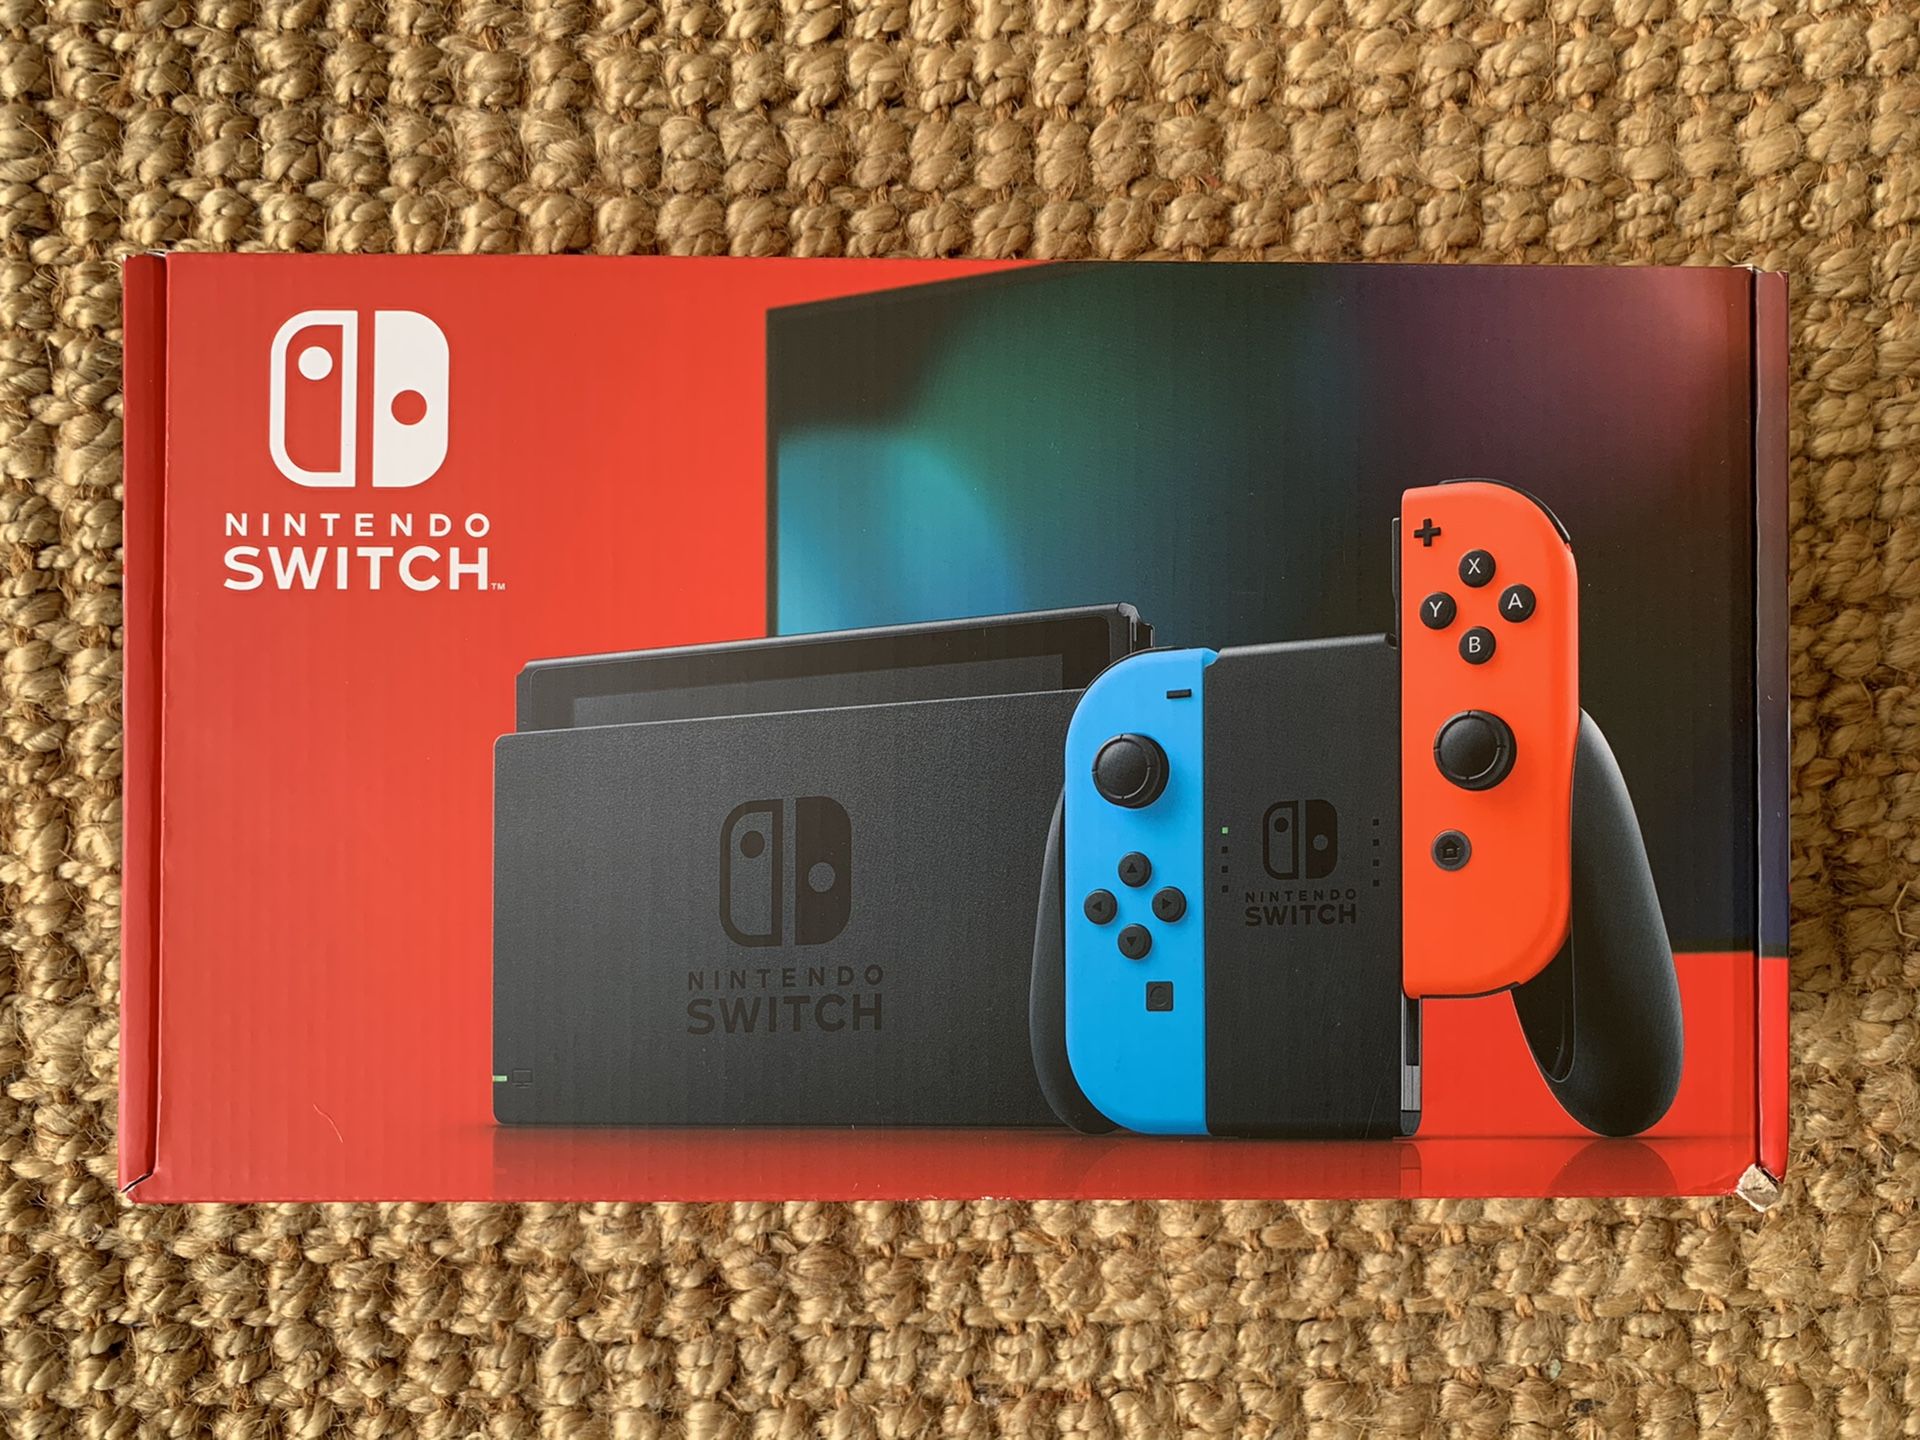 Nintendo Switch 32gb Neon Red/Neon Blue *PRICE NEGOTIABLE*